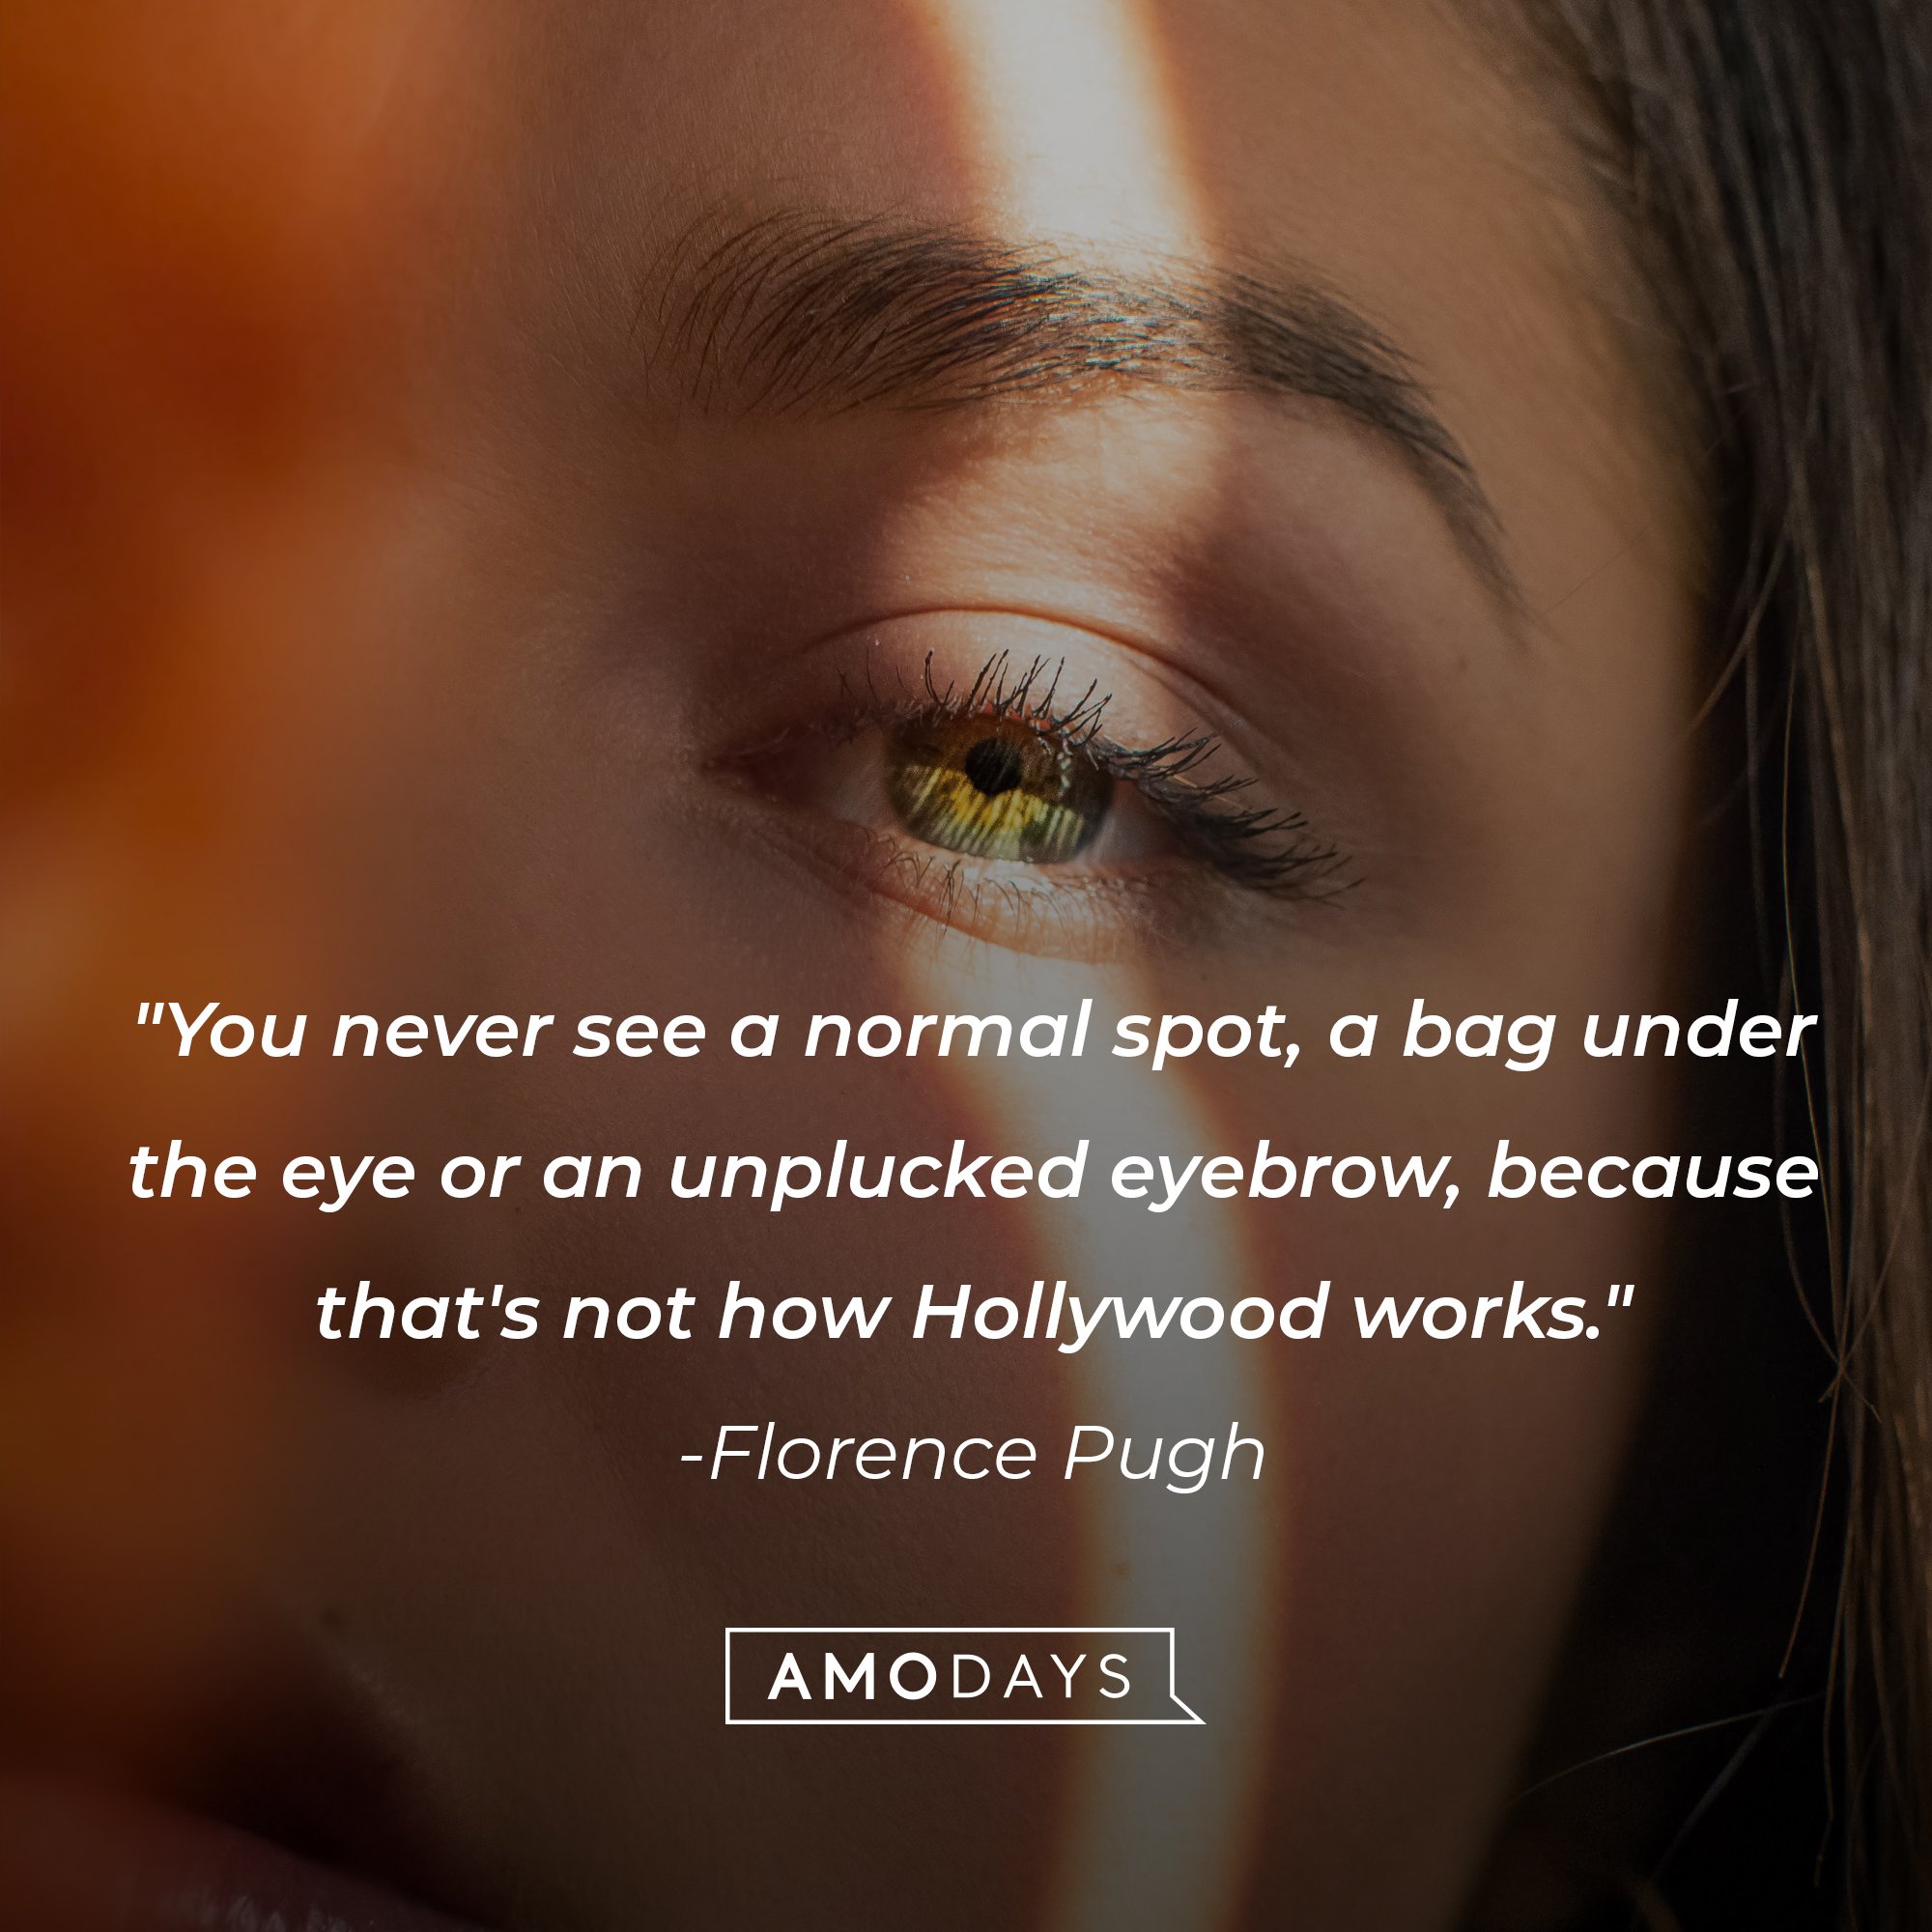 Florence Pugh’s quote: “You never see a normal spot, a bag under the eye or an unplucked eyebrow, because that's not how Hollywood works.” | Image: AmoDays 